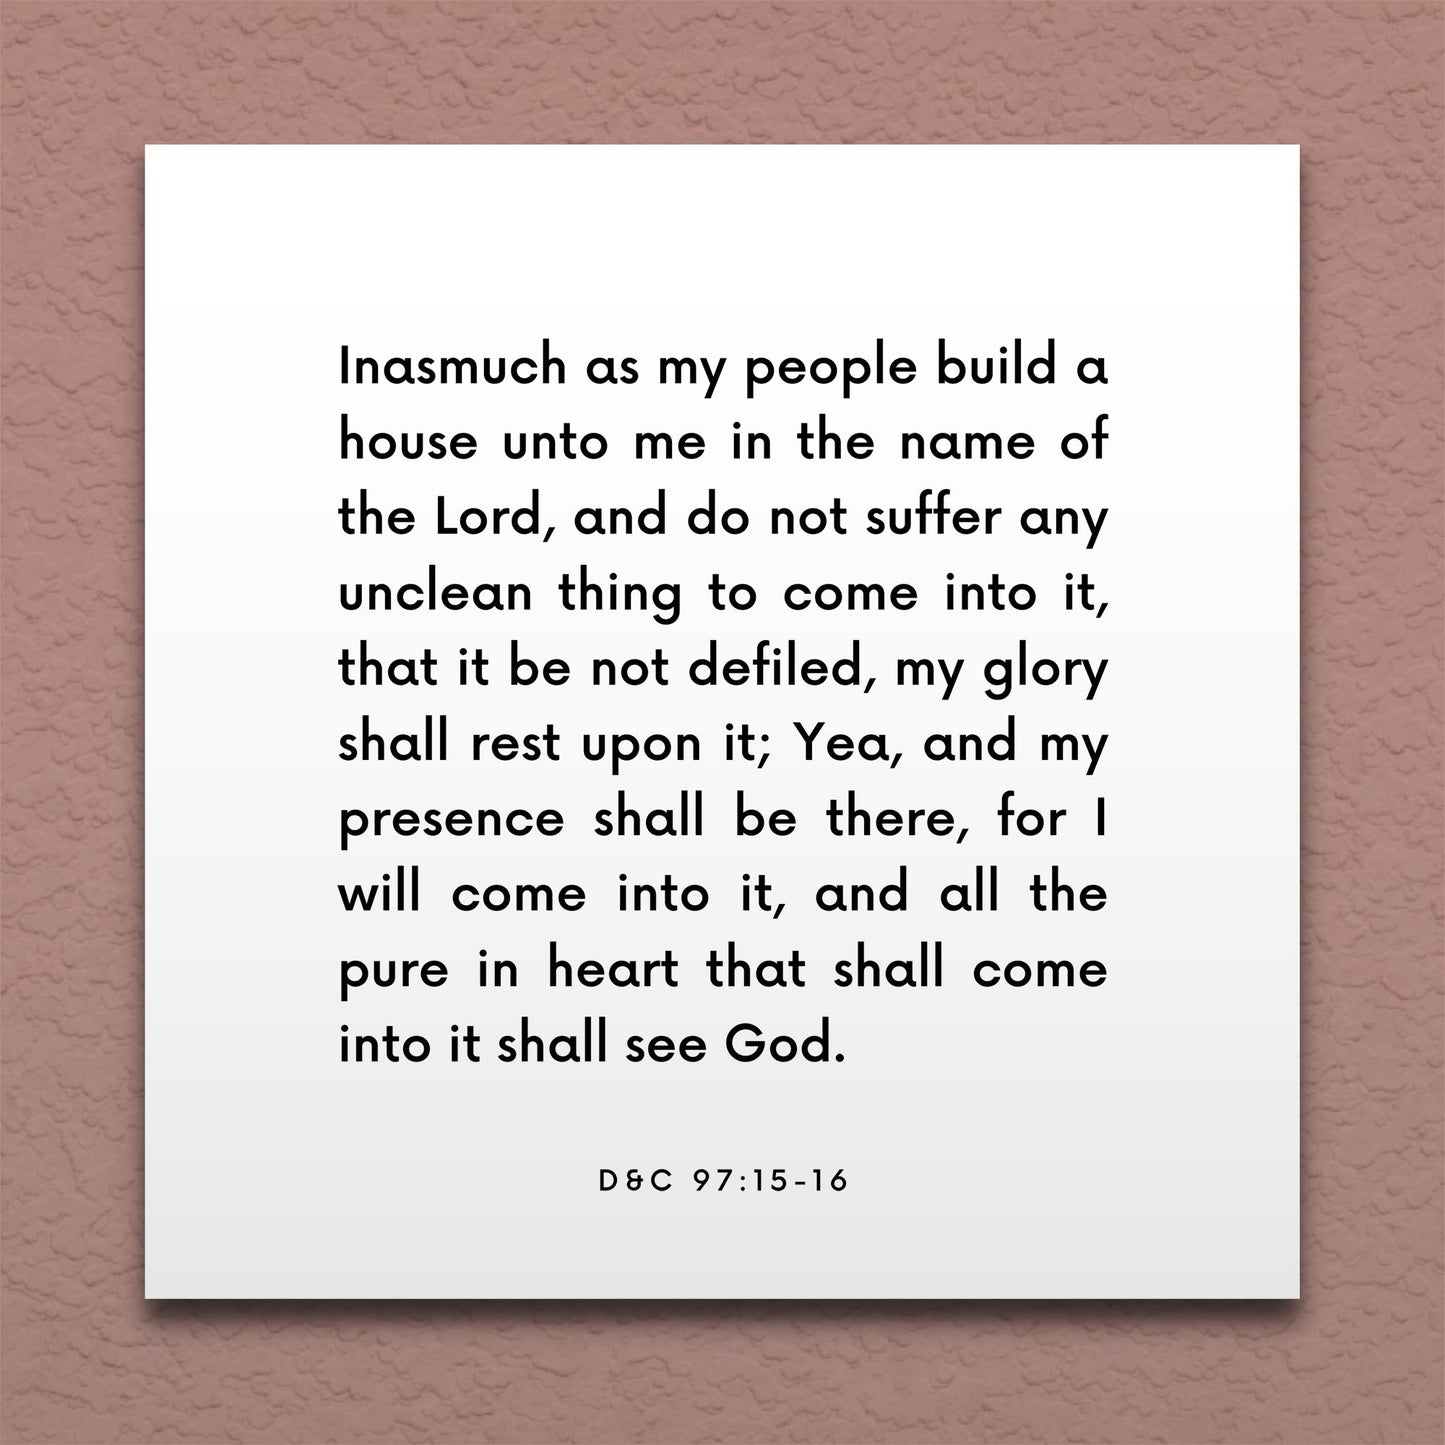 Wall-mounted scripture tile for D&C 97:15-16 - "Inasmuch as my people build a house unto me"